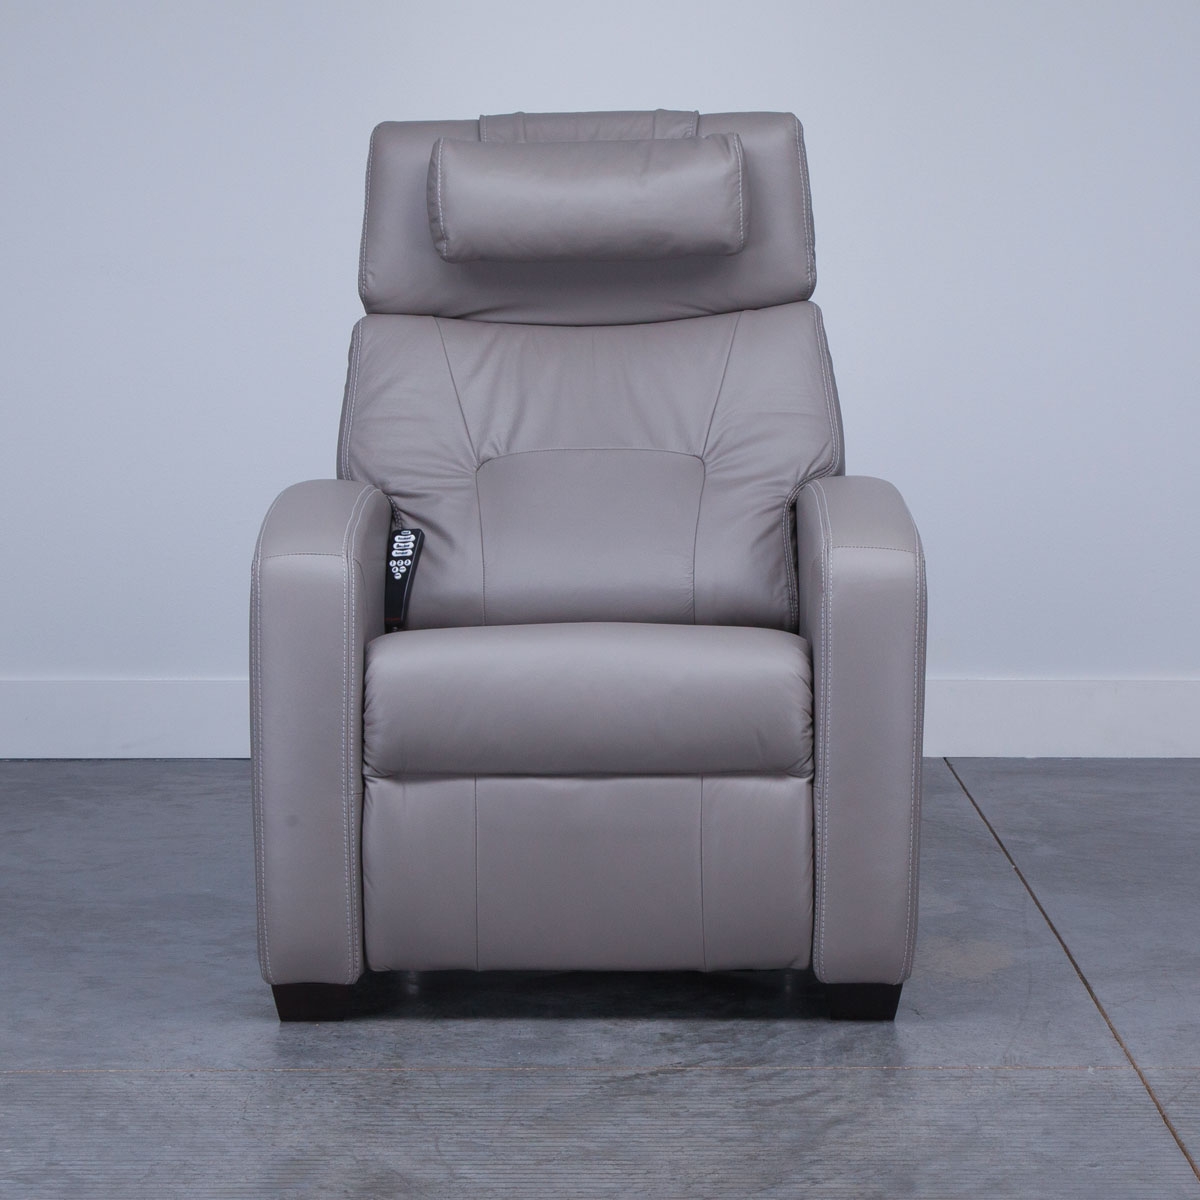 Picture of ZG5 ZERO GRAVITY RECLINER WITH MASSAGE AND HEAT